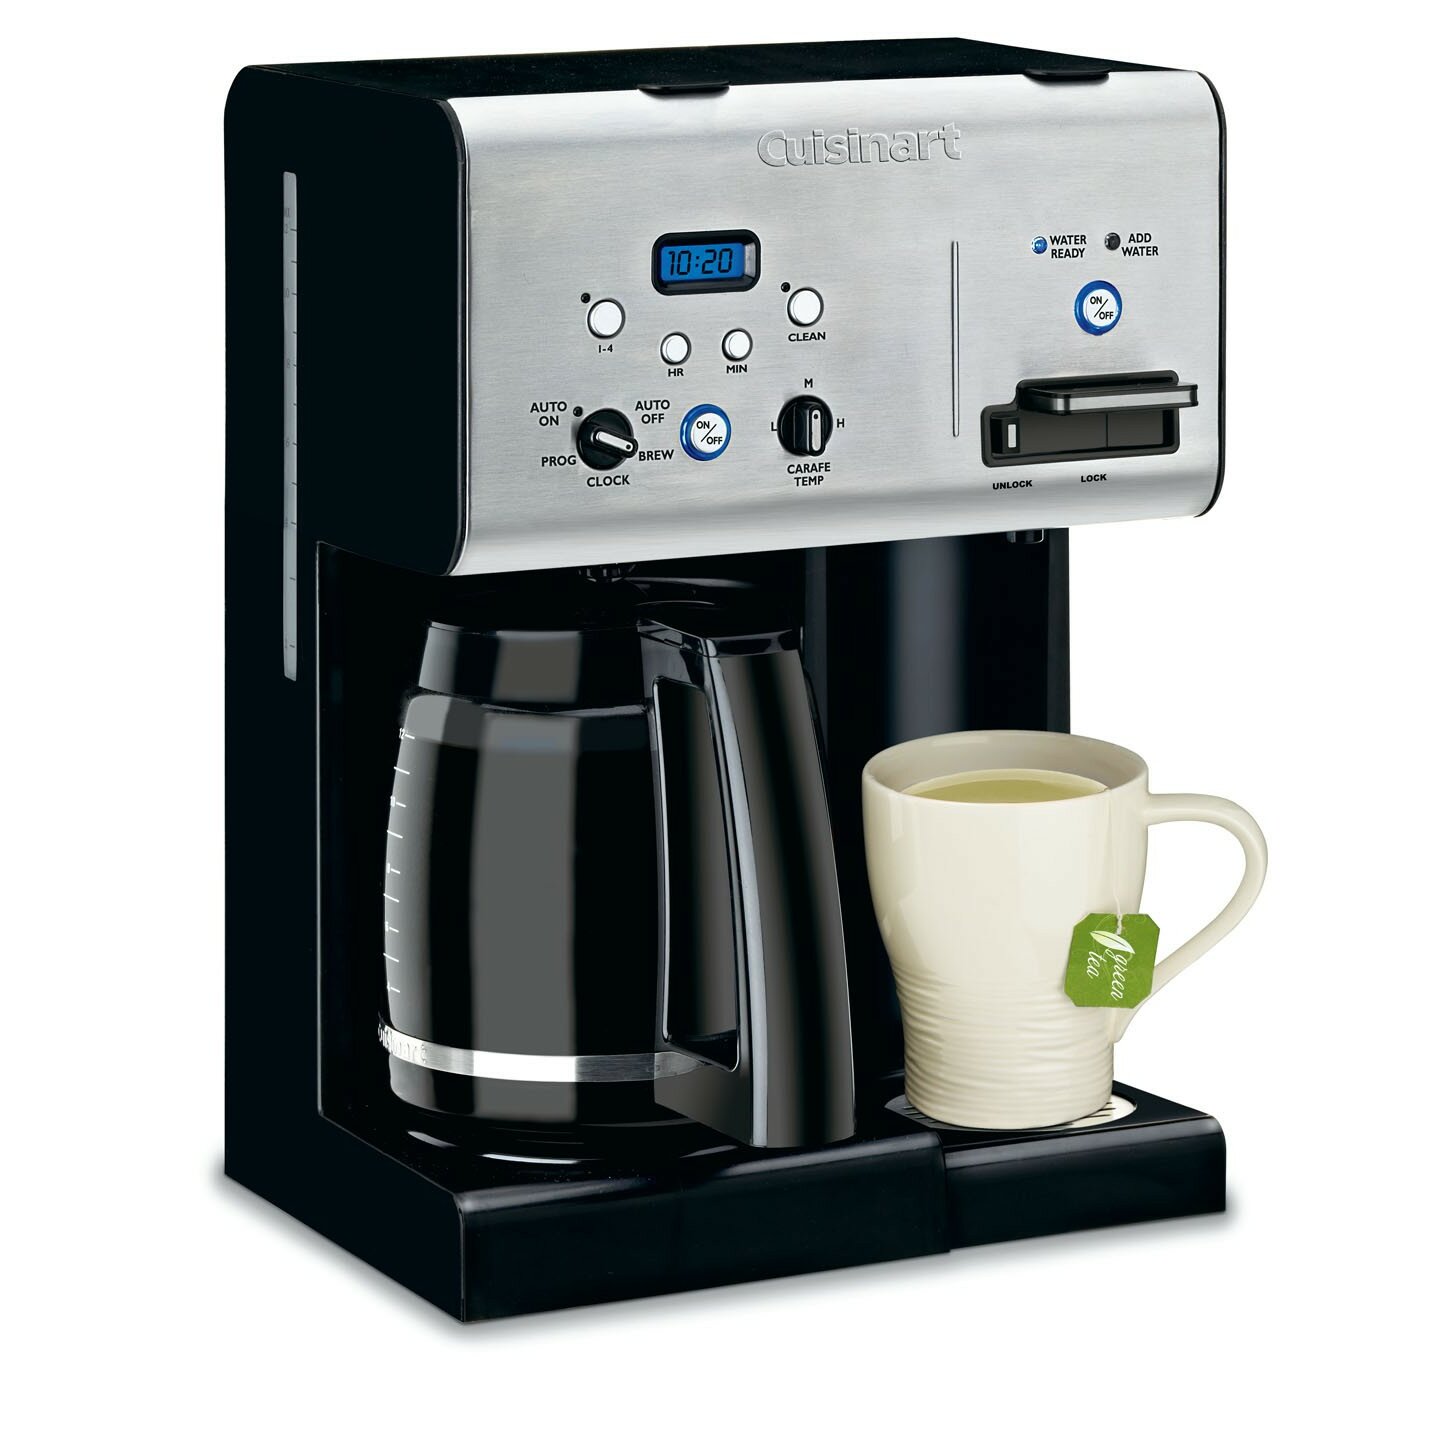 Cuisinart Programmable 12 Cup Coffee Maker with Hot Water ...